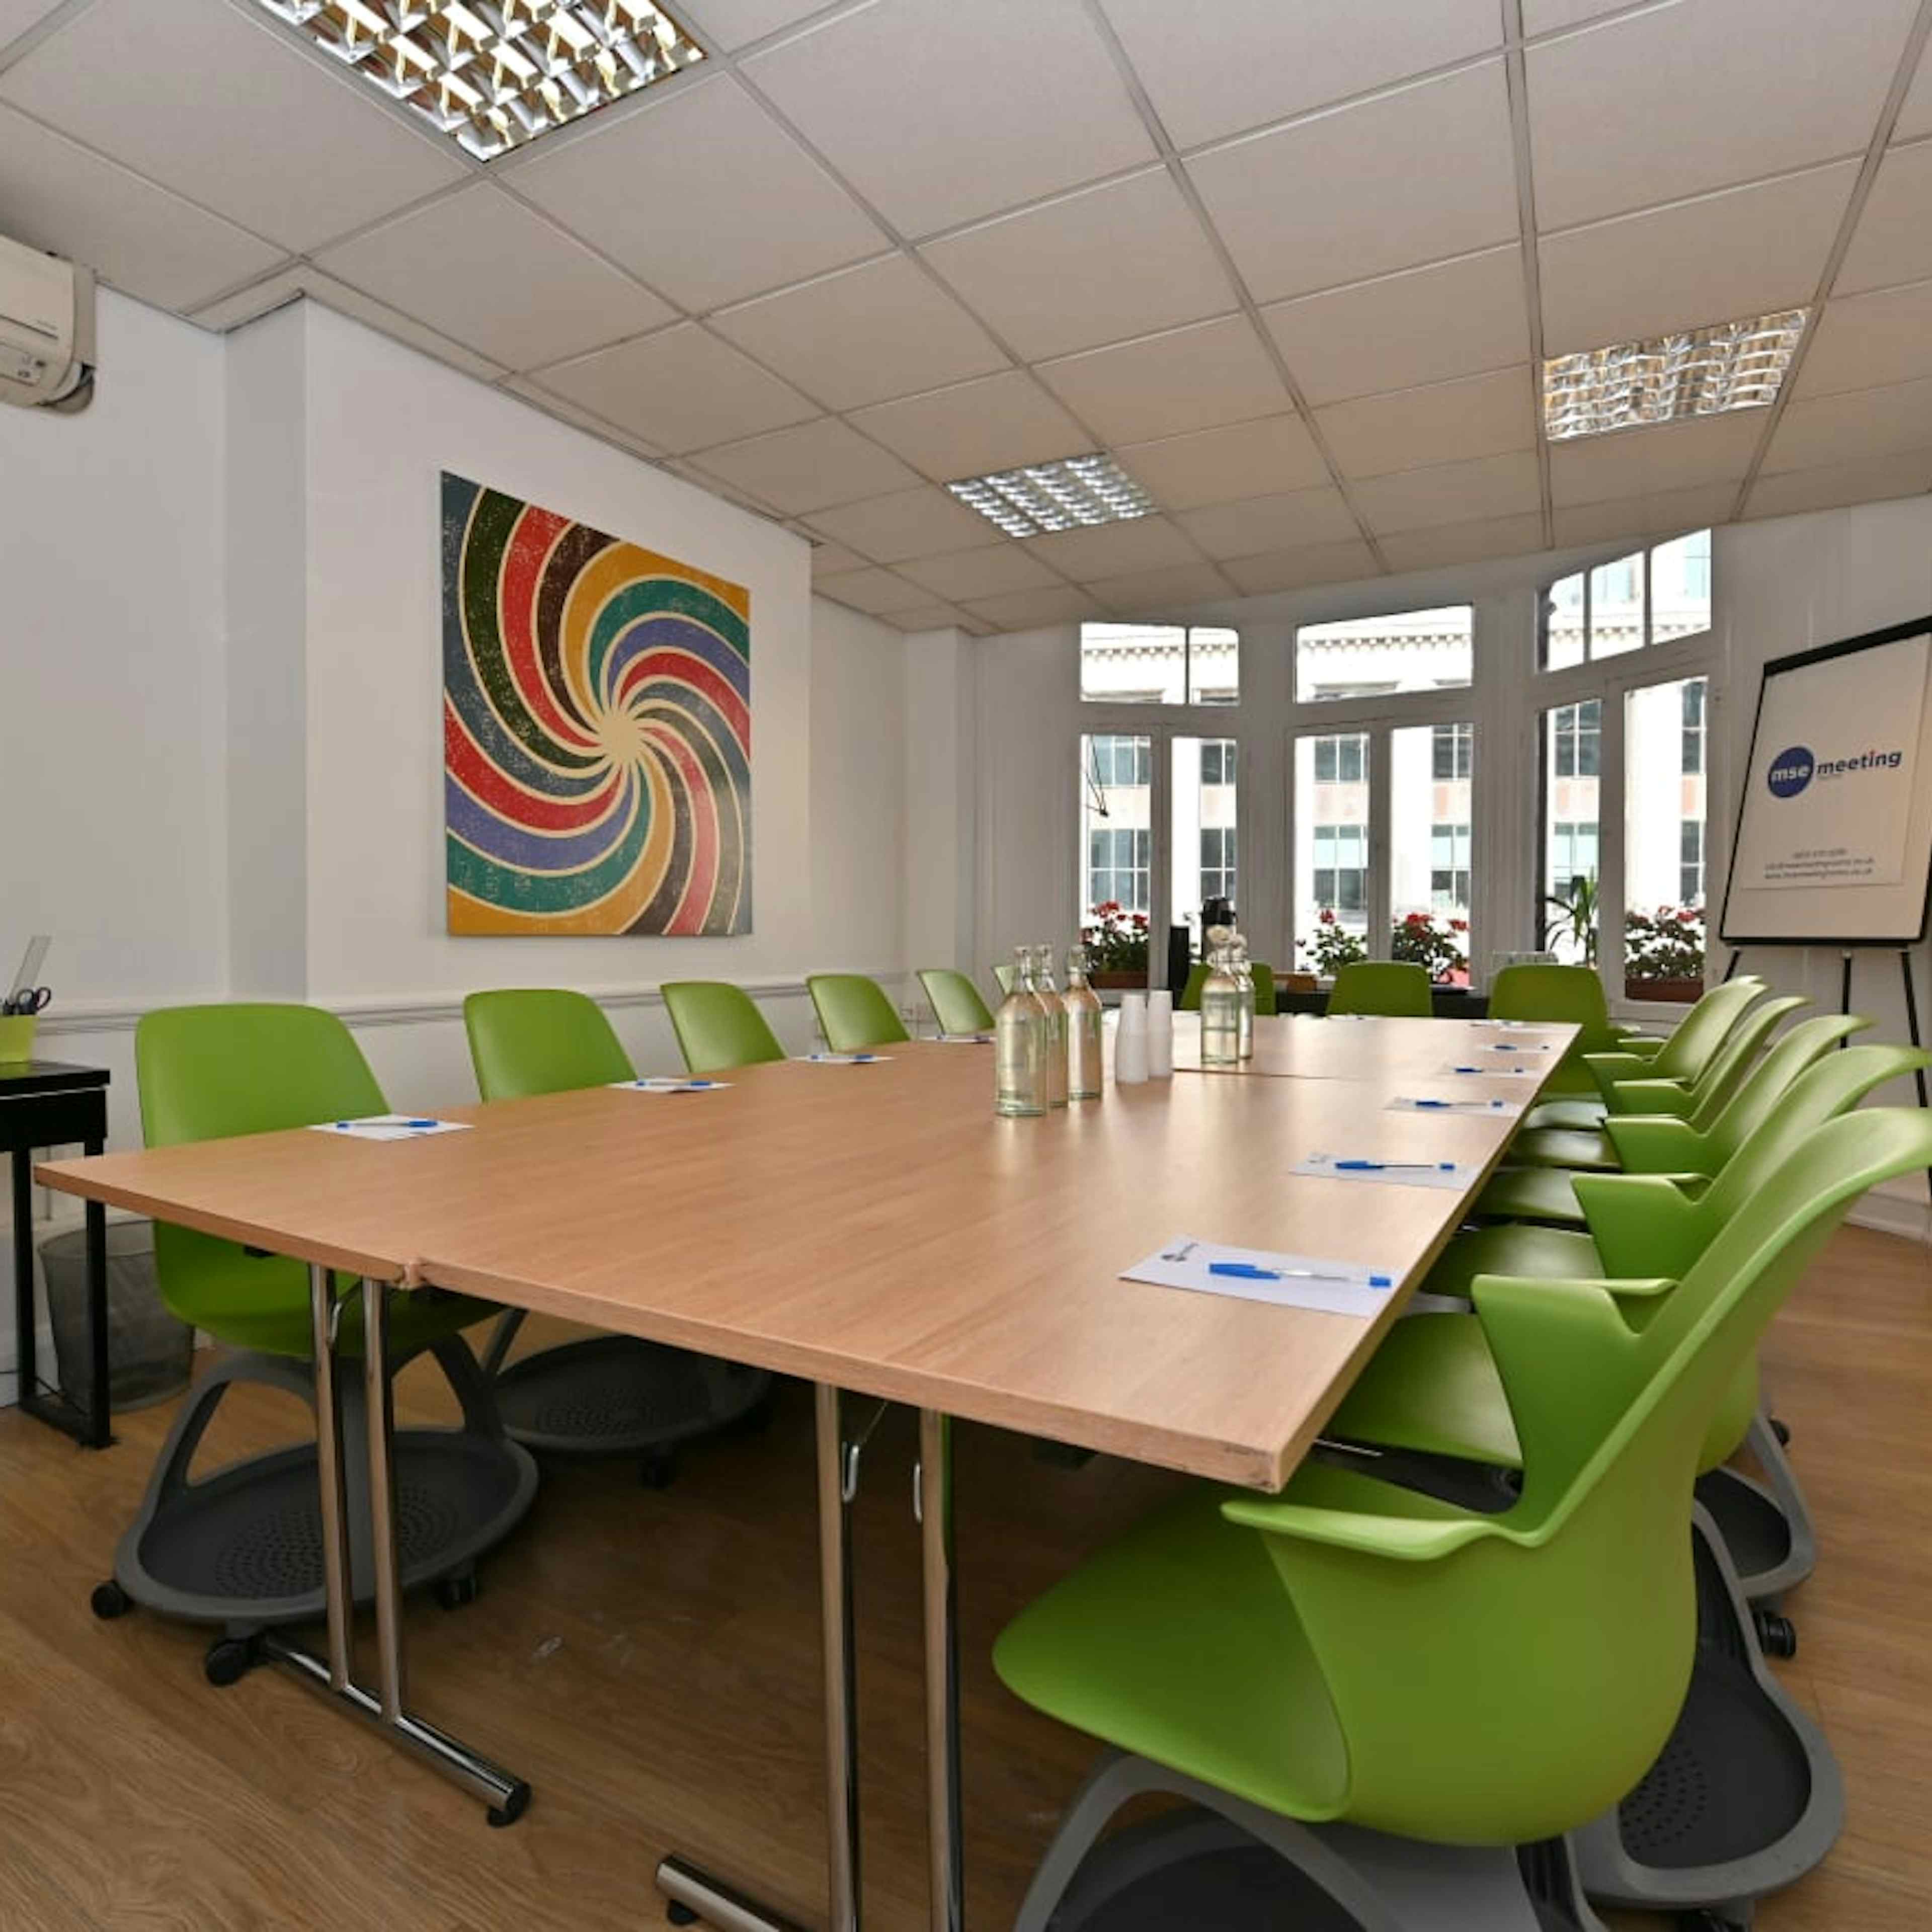 MSE Meeting Rooms - Tottenham Court Road - oslo image 1